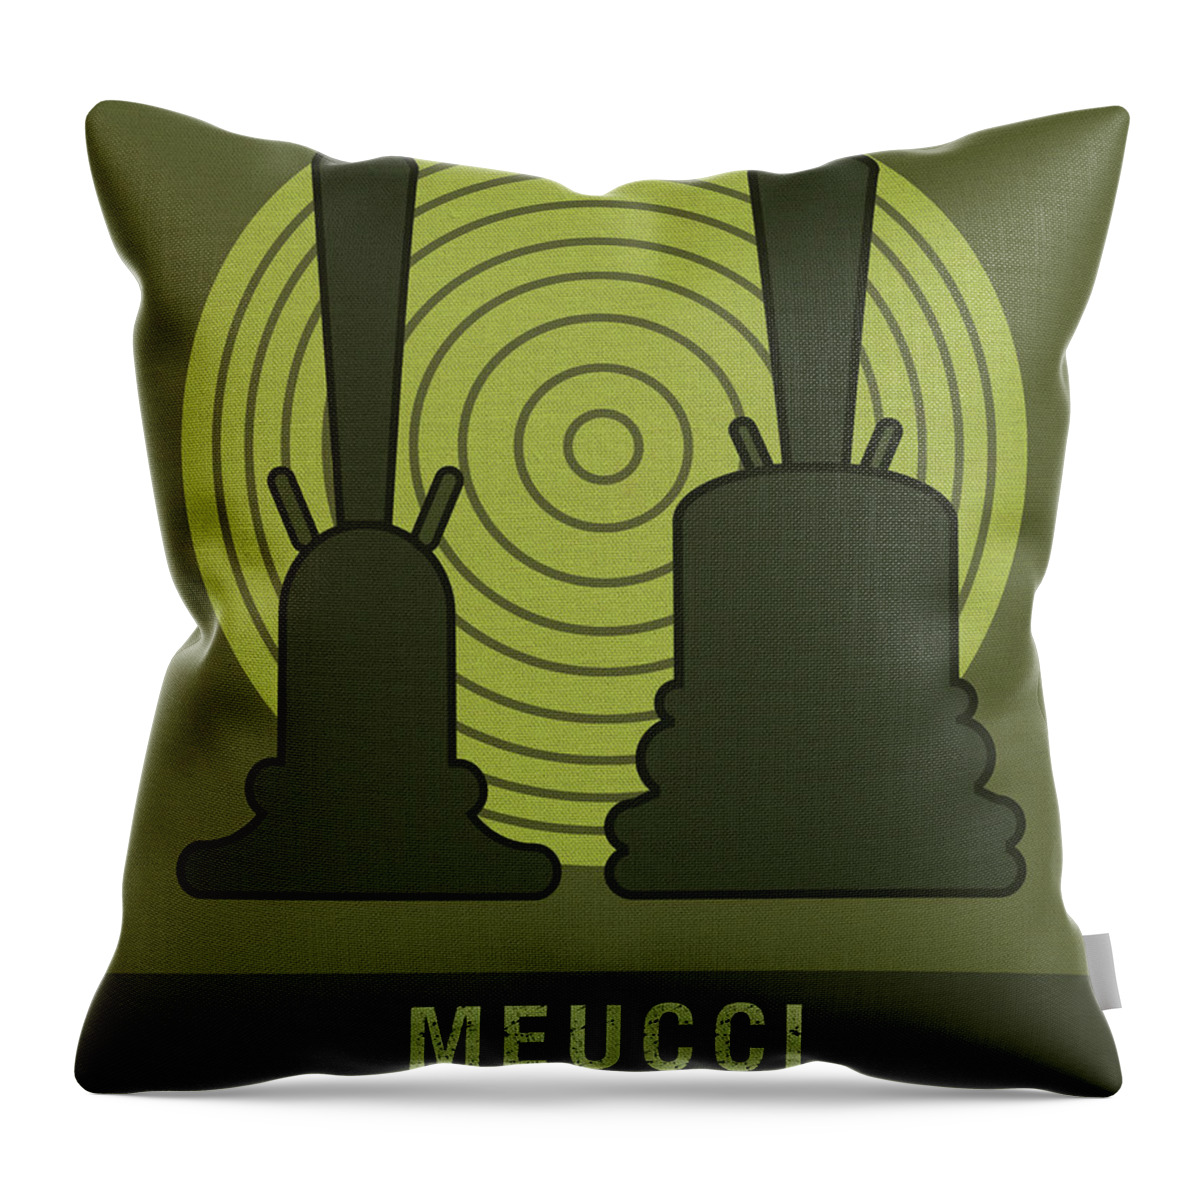 Meucci Throw Pillow featuring the mixed media Science Posters - Antonio Meucci - Inventor by Studio Grafiikka